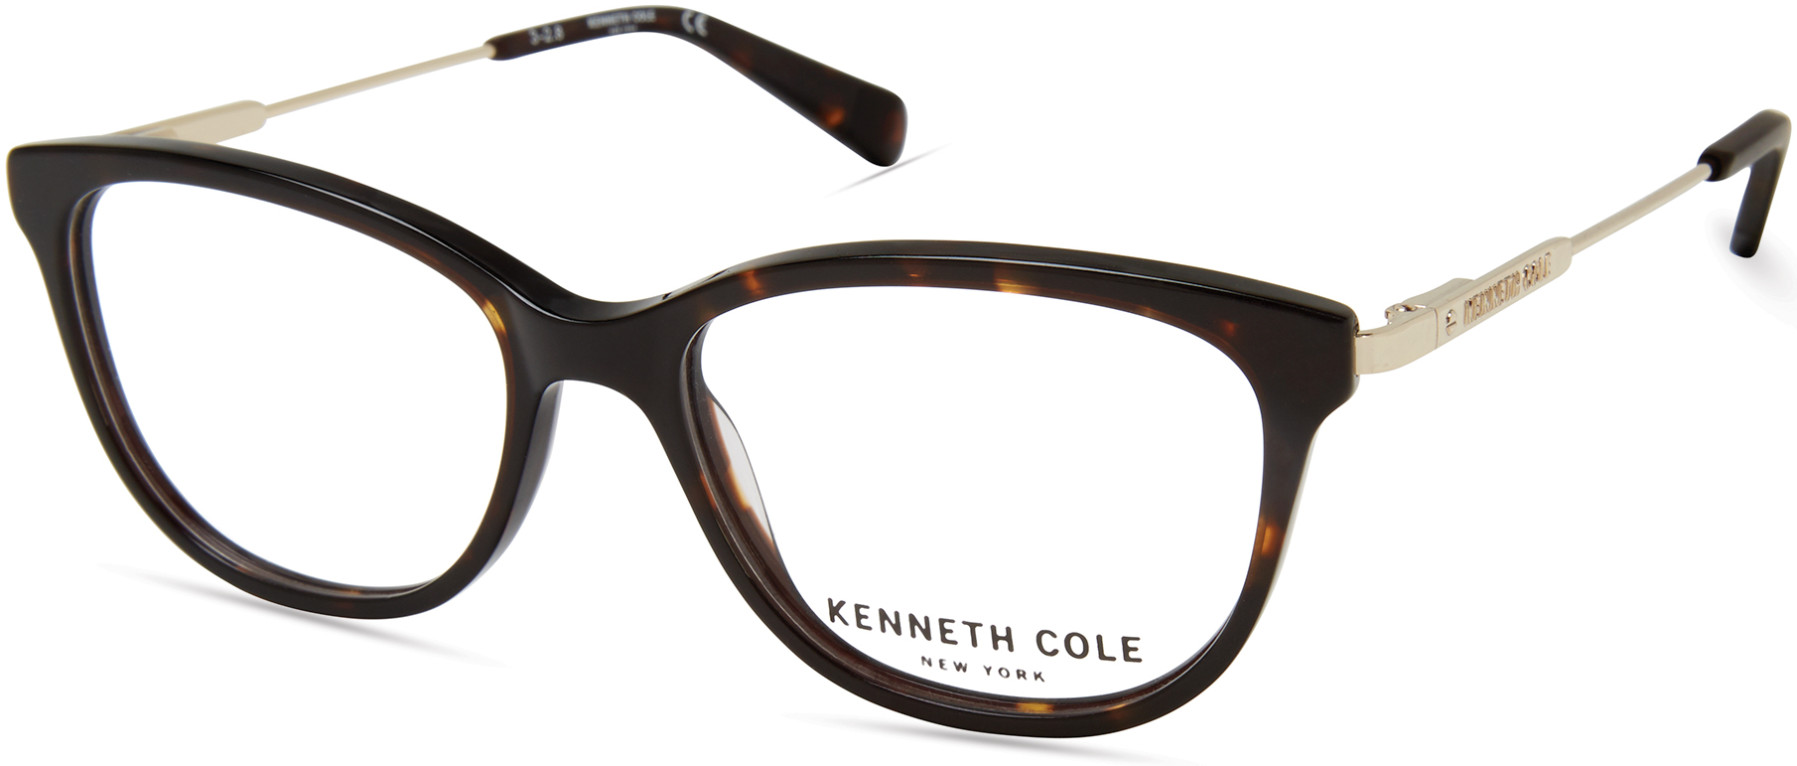 KENNETH COLE NY 0298 052